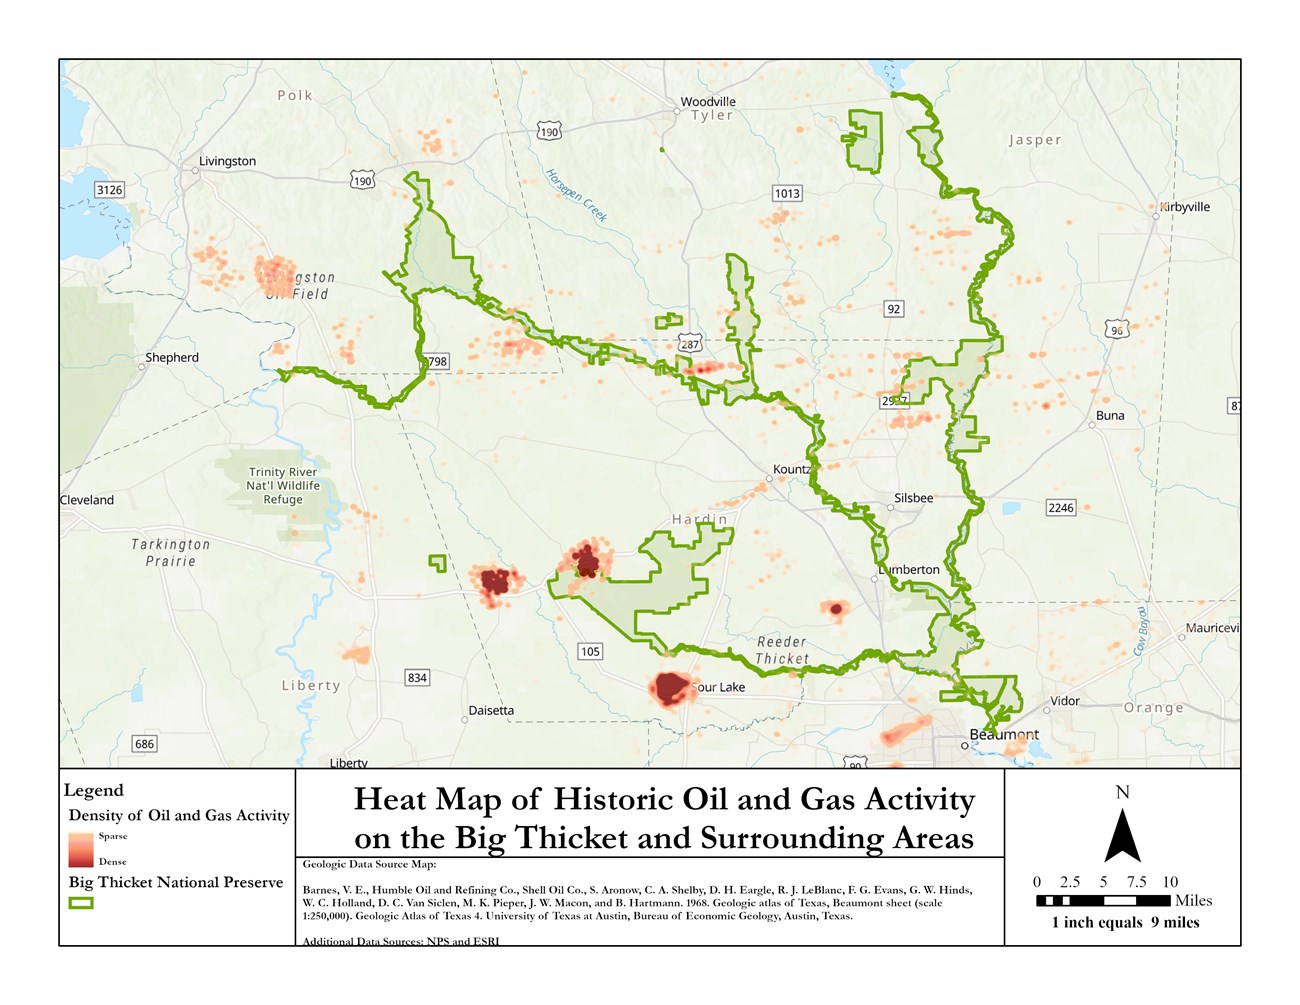 map of the density of oil and gas activity in the big thicket region. dark red indicates higher density of activity.